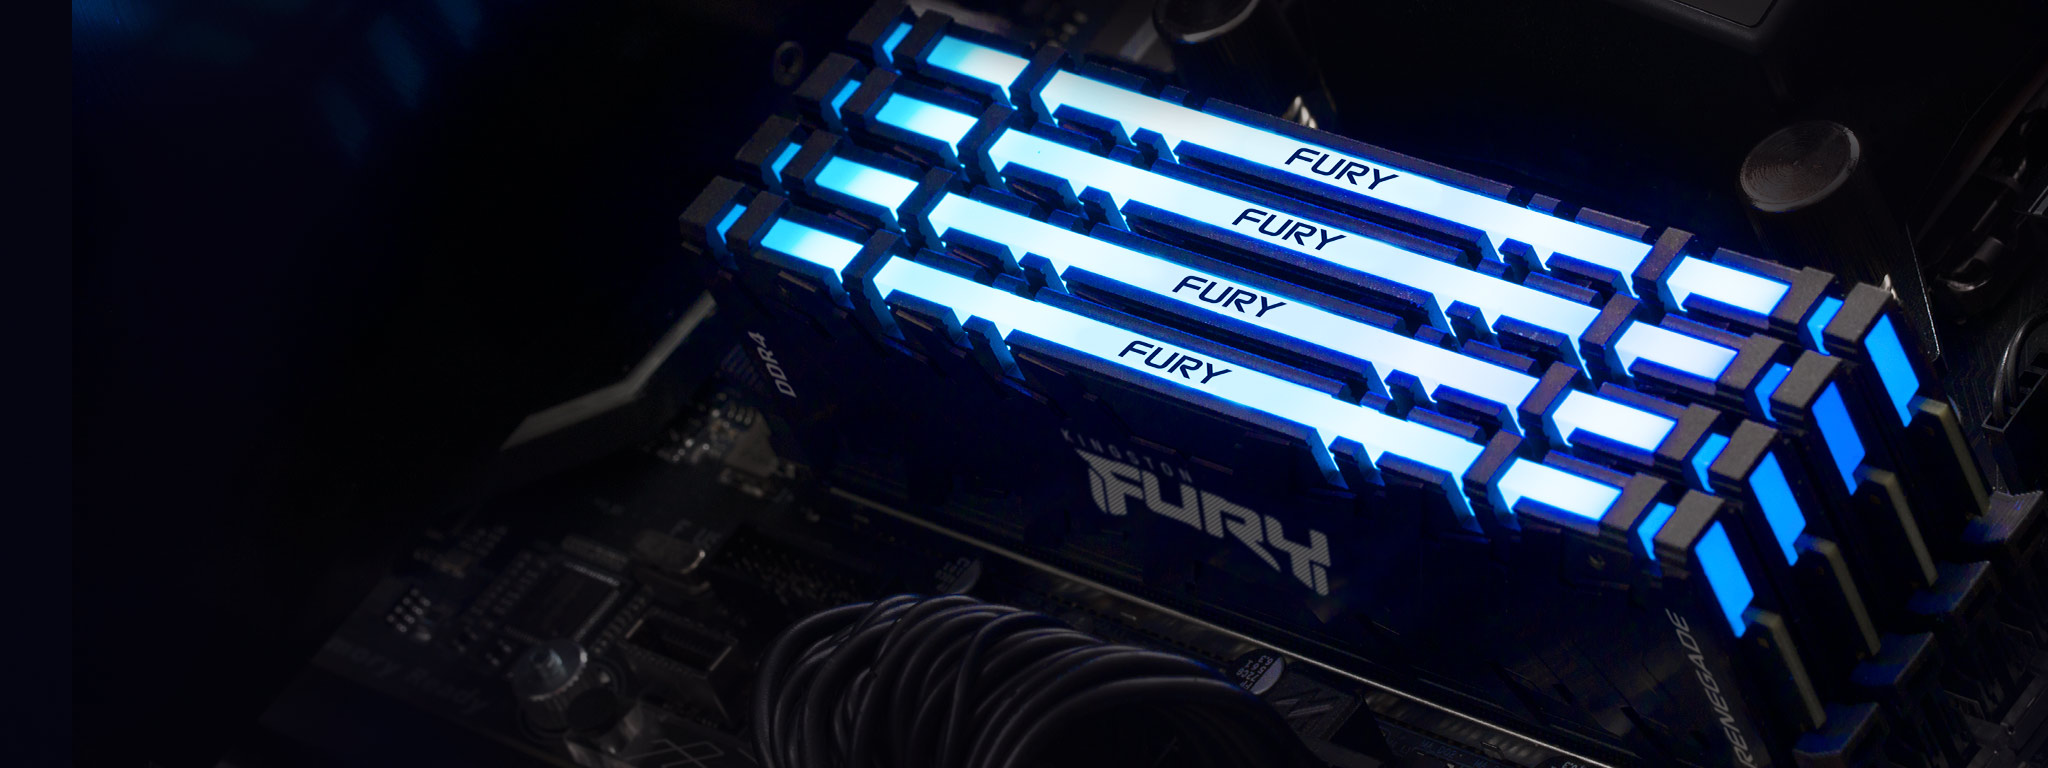 4 Kingston FURY Renegade DDR4 RGB memory modules glow in blue, mounted into memory slots on a motherboard